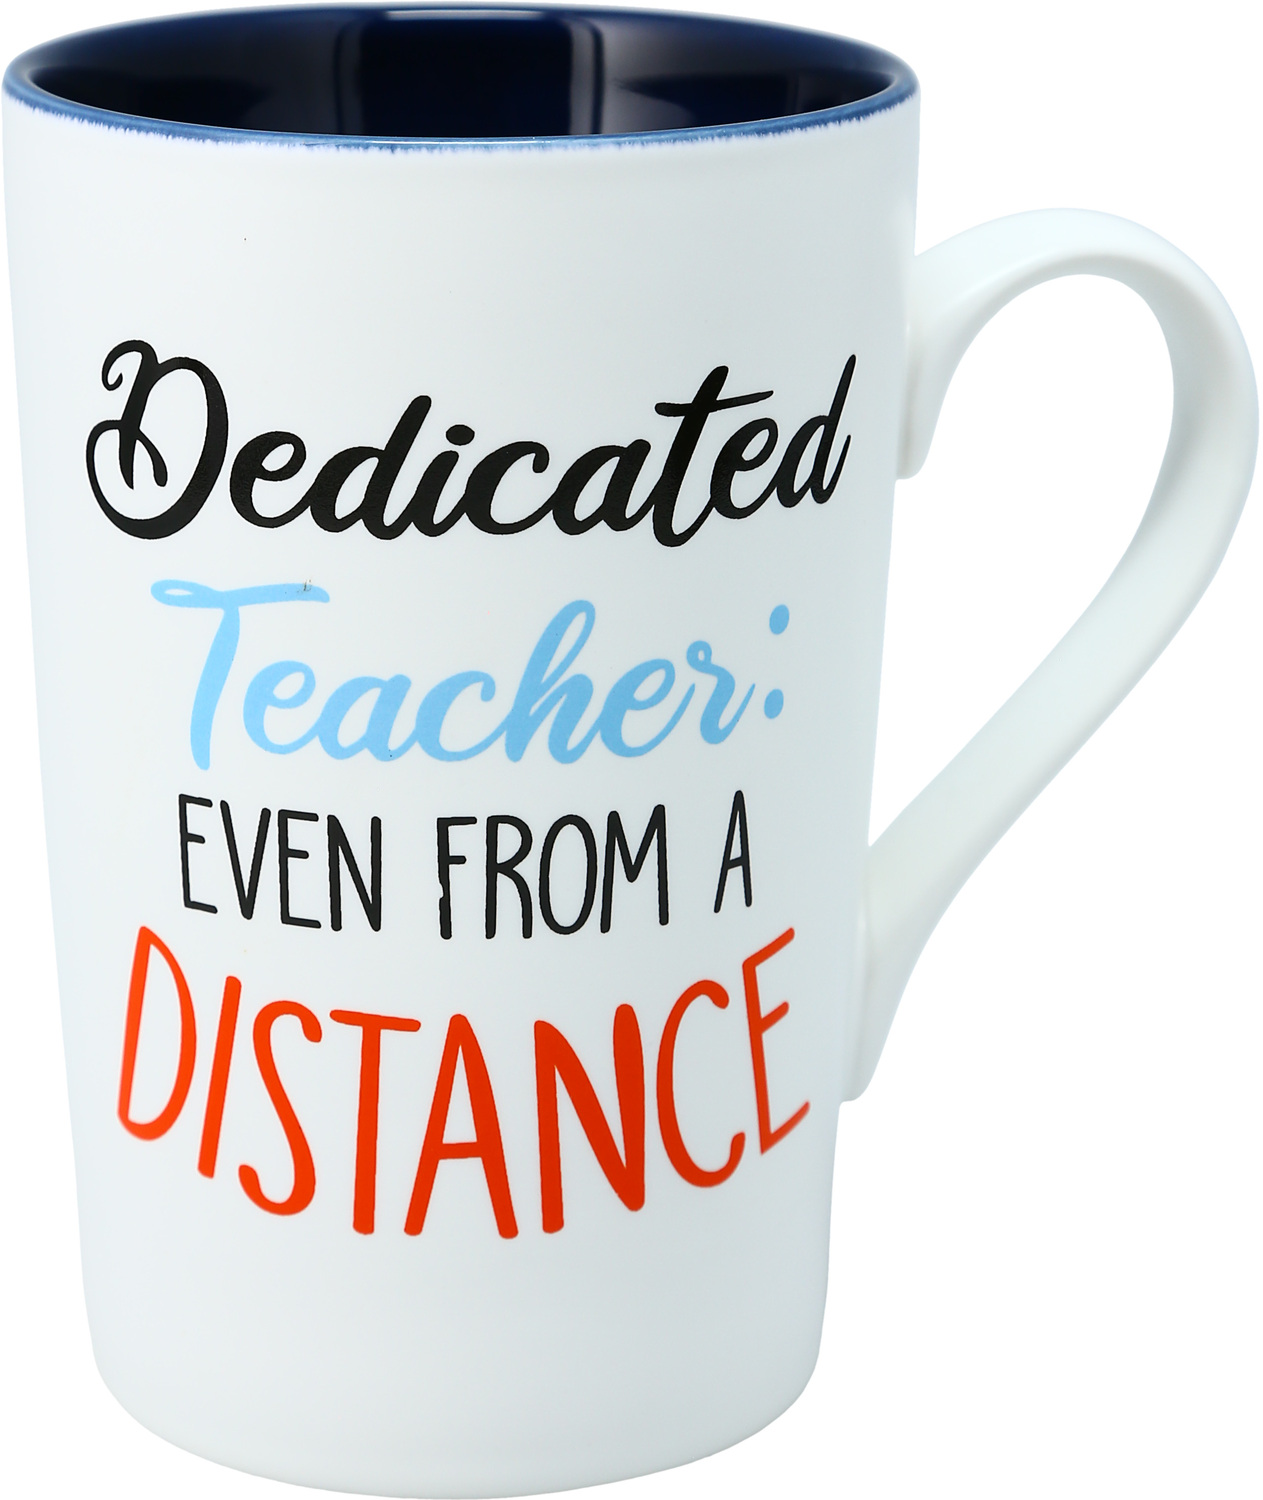 Dedicated Teacher by Essentially Yours - Dedicated Teacher - 15 oz Latte Cup